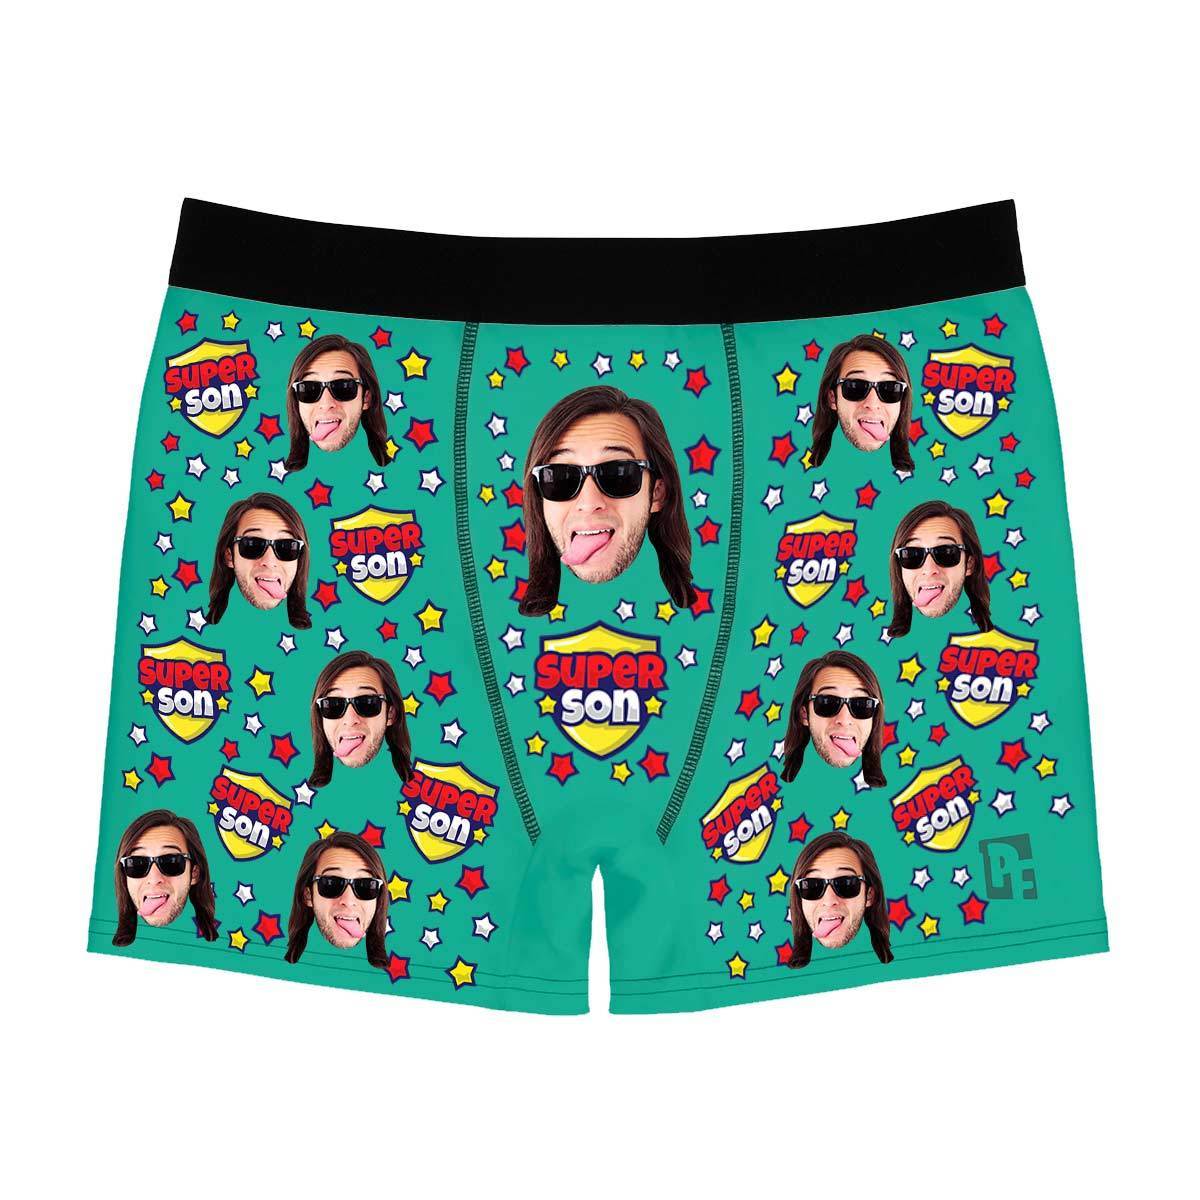 Mint Super son men's boxer briefs personalized with photo printed on them